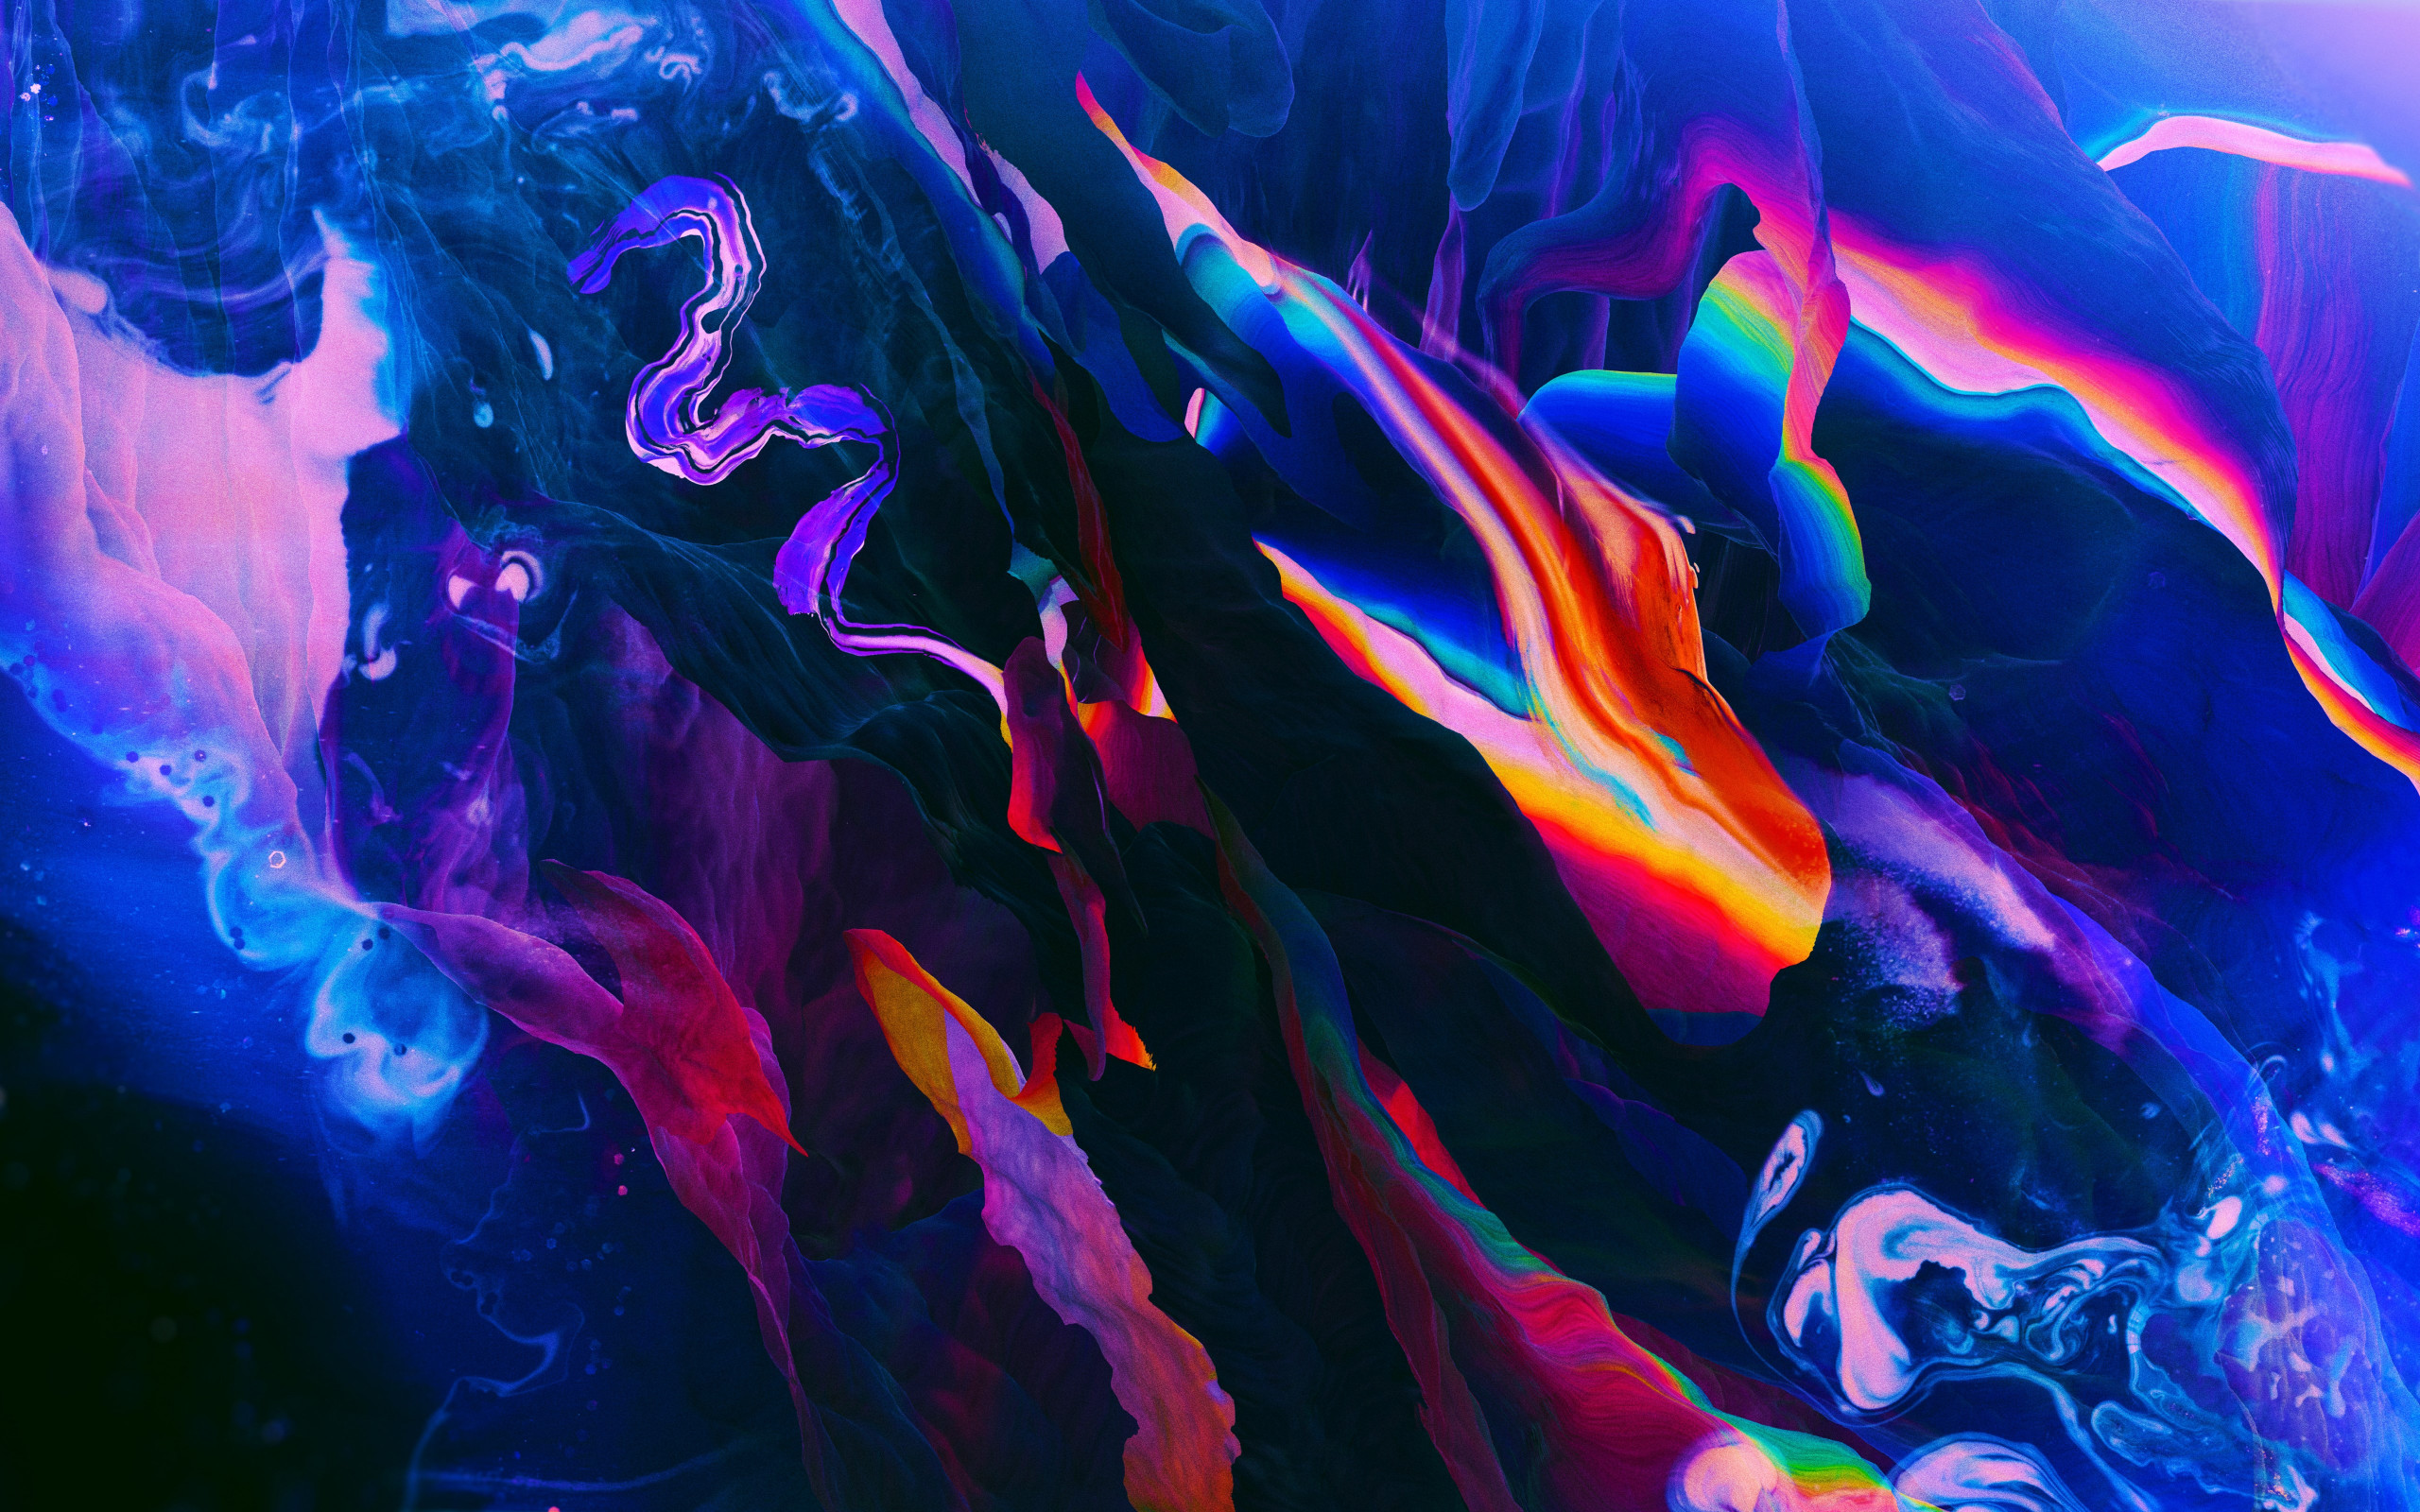 Download wallpaper: Abstract colorful 2560x1600